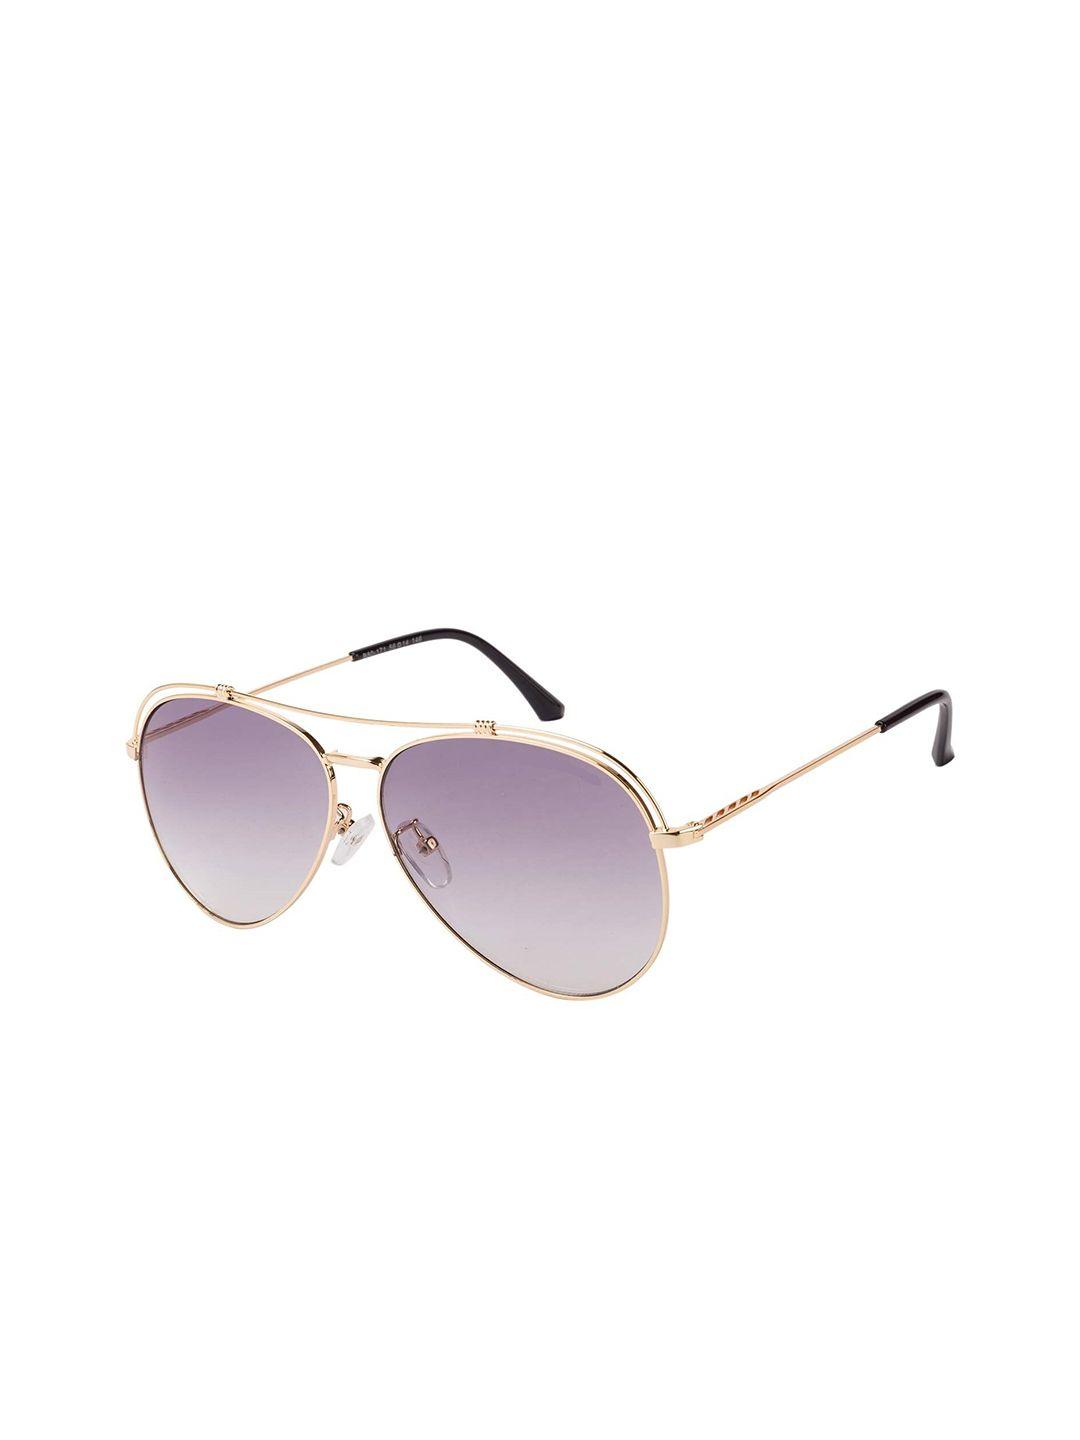 sunnies lens & aviator sunglasses with uv protected lens b80-171-grey-gold